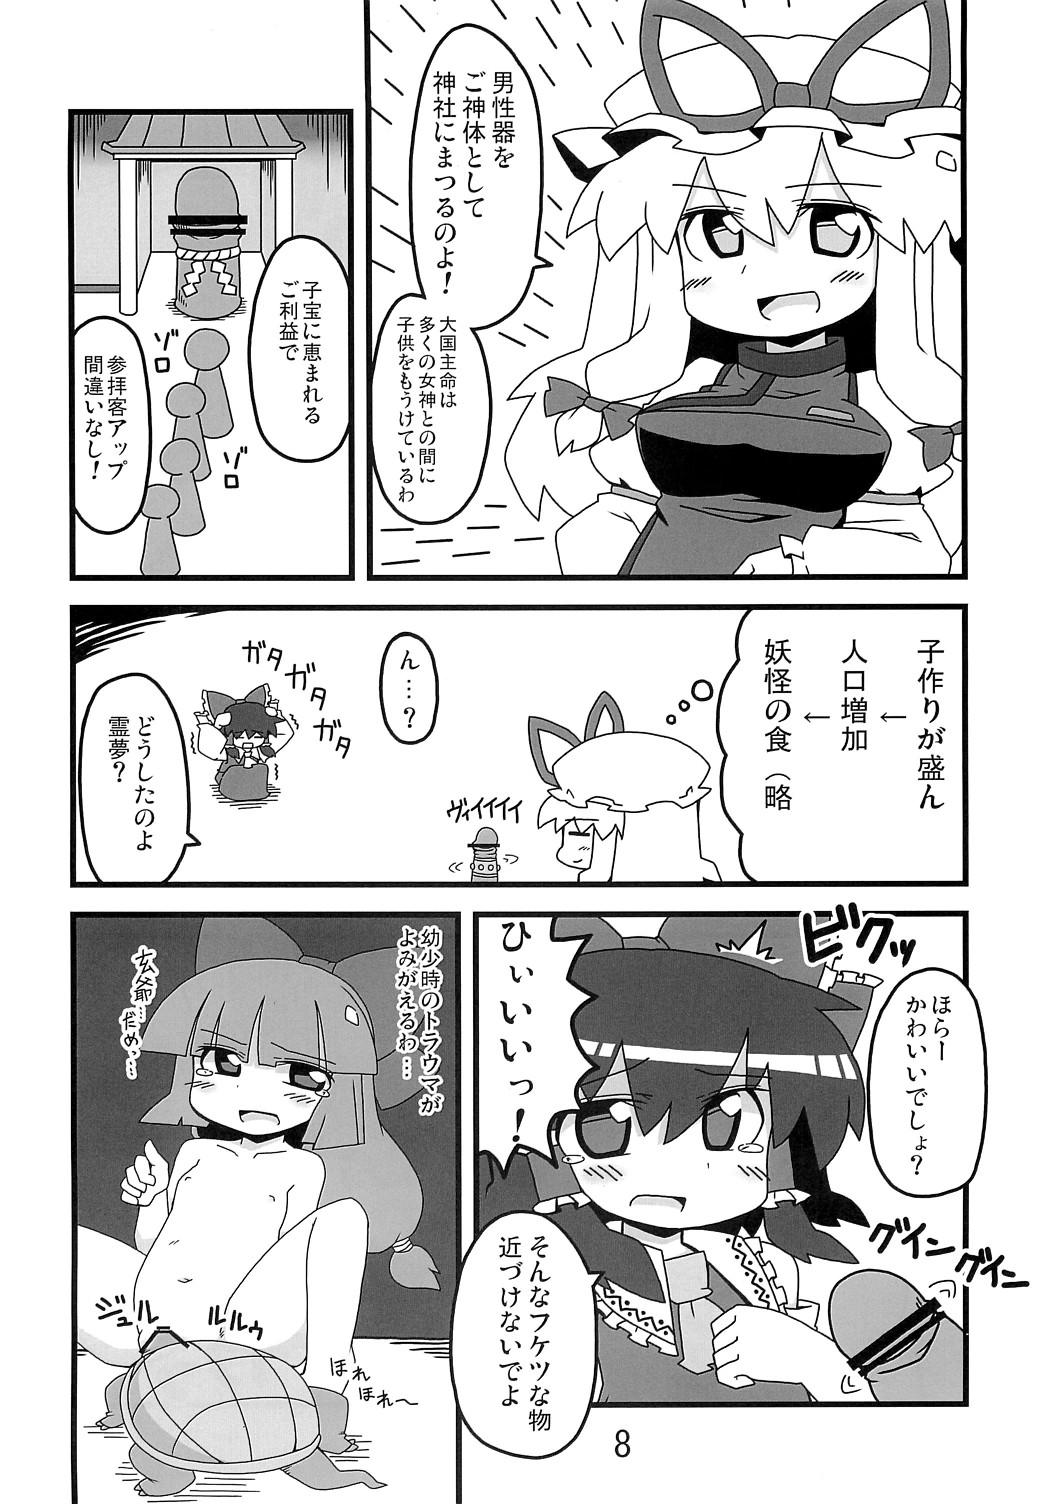 Tan 東方豊年祭 - Touhou project Amateurporn - Page 7